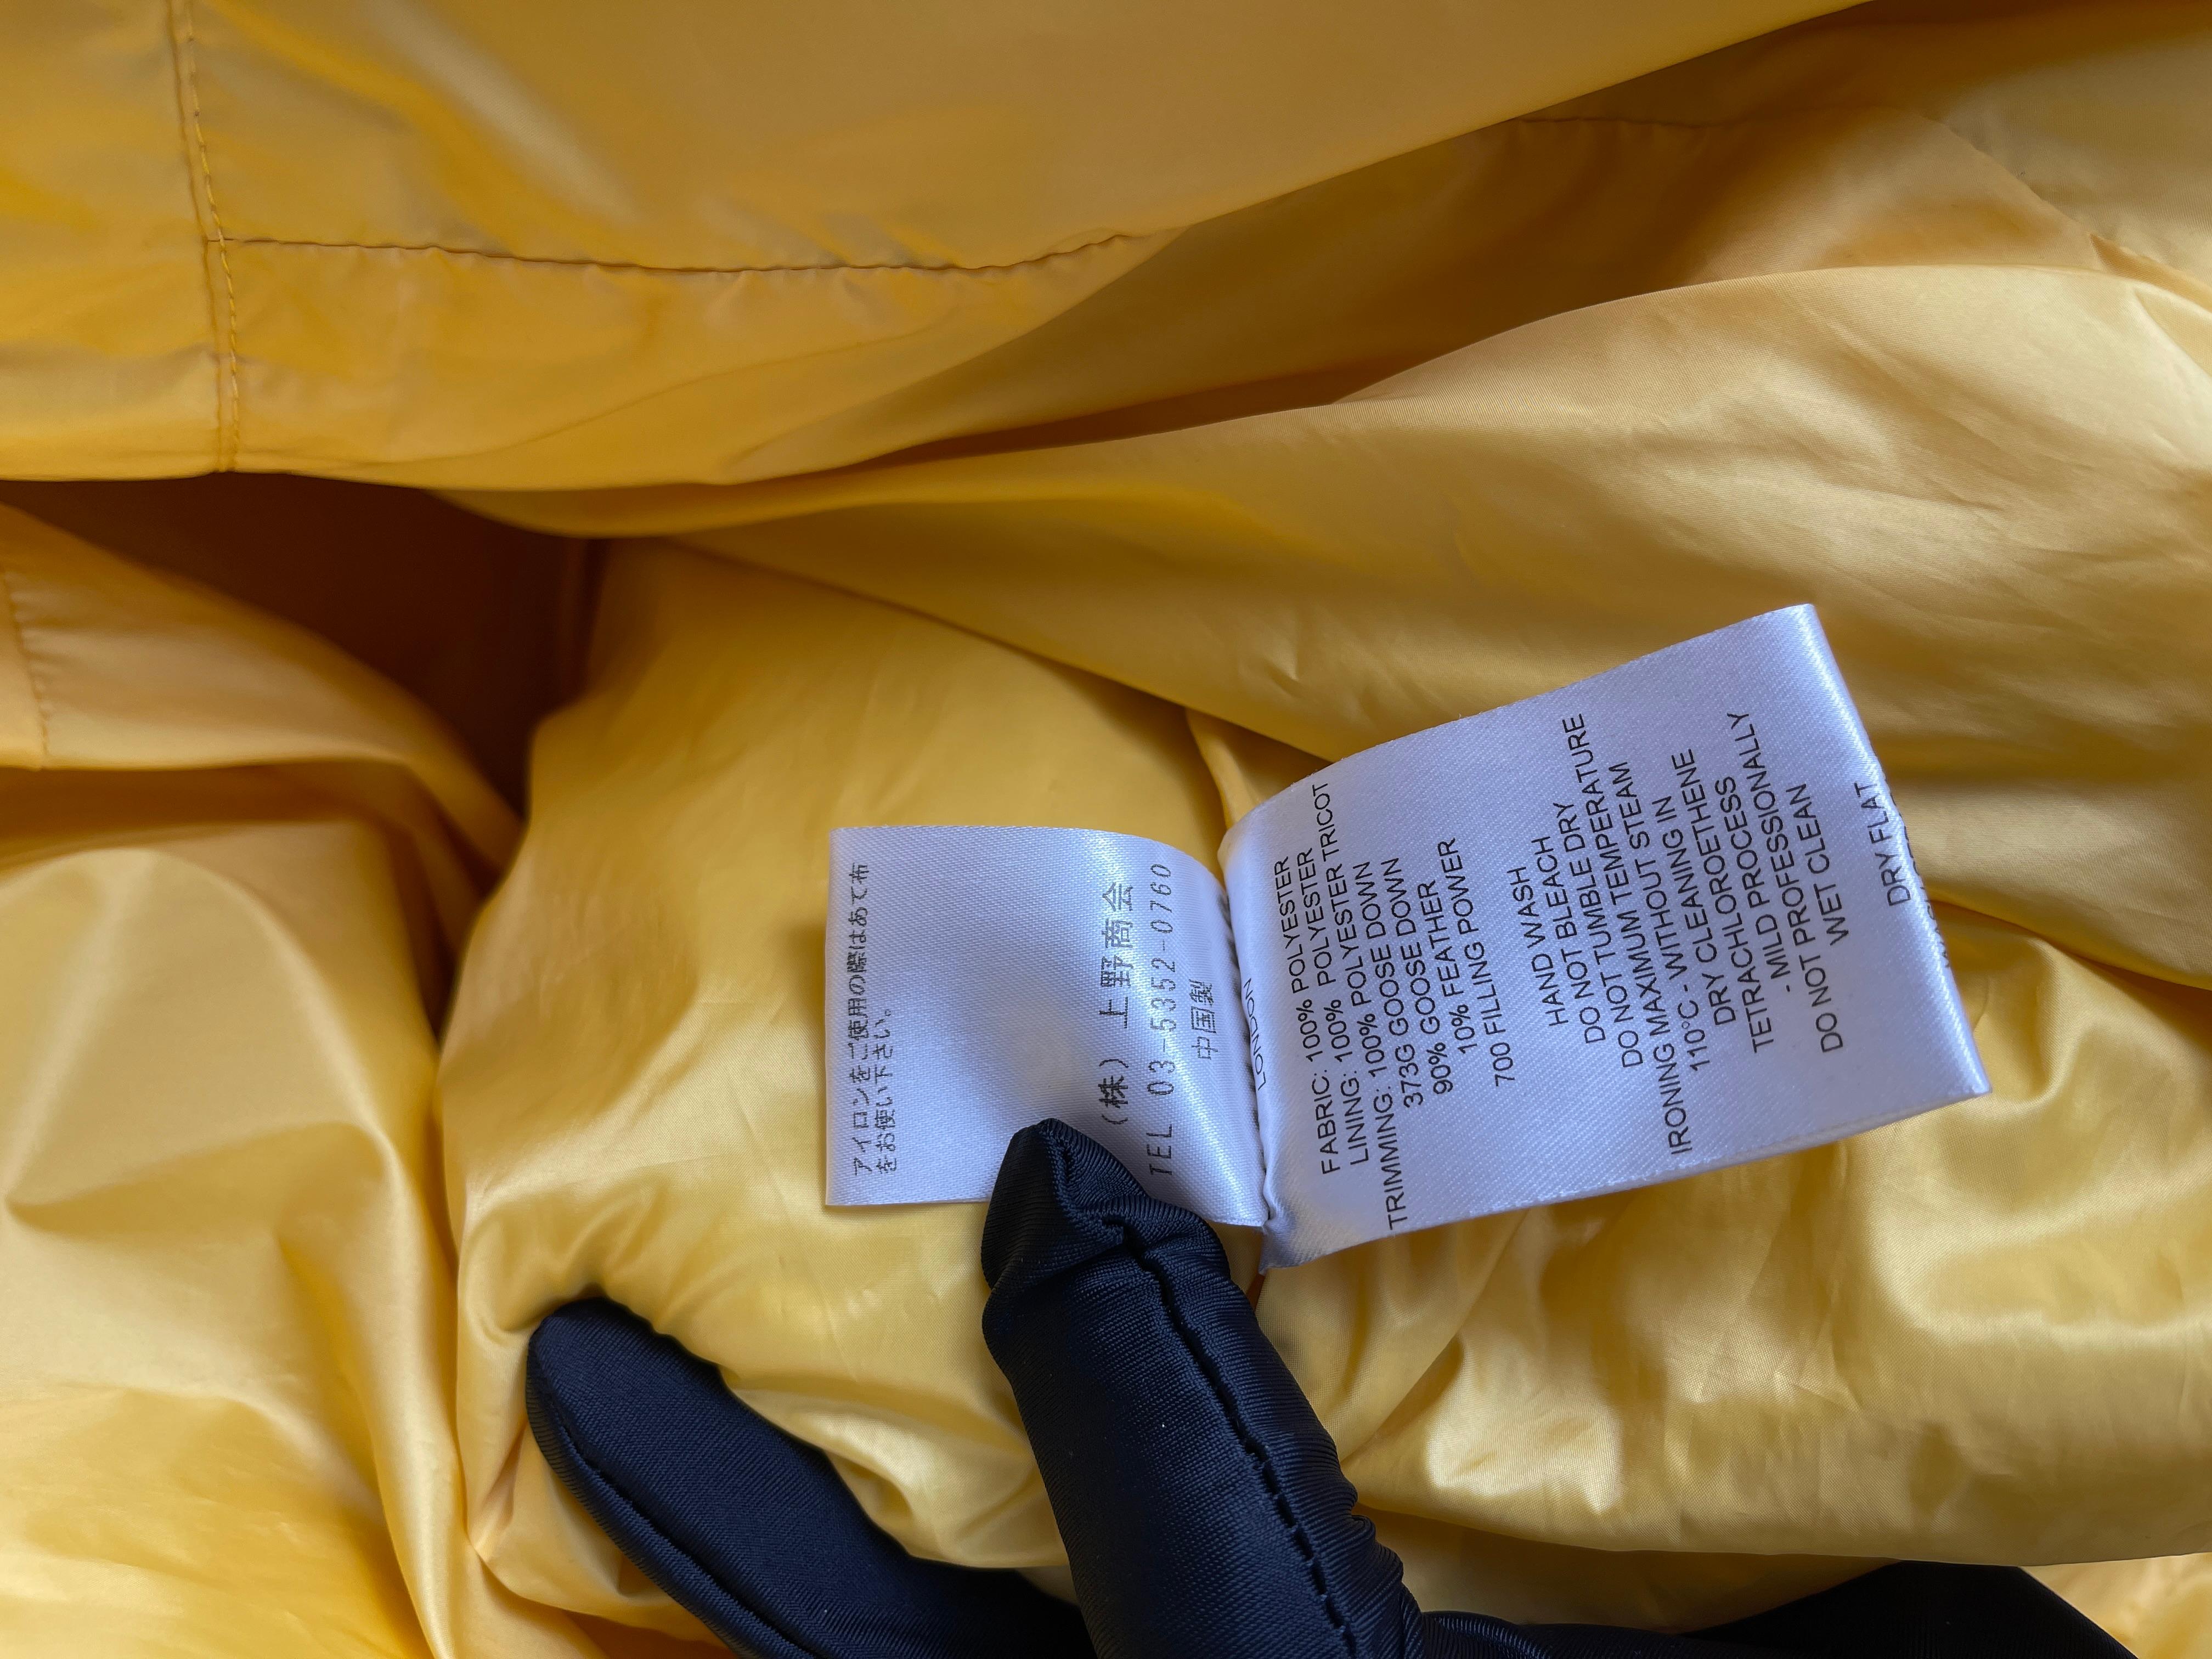 Chen Peng A/W2018 Yellow Bandana Puffer Jacket In Excellent Condition For Sale In Tương Mai Ward, Hoang Mai District